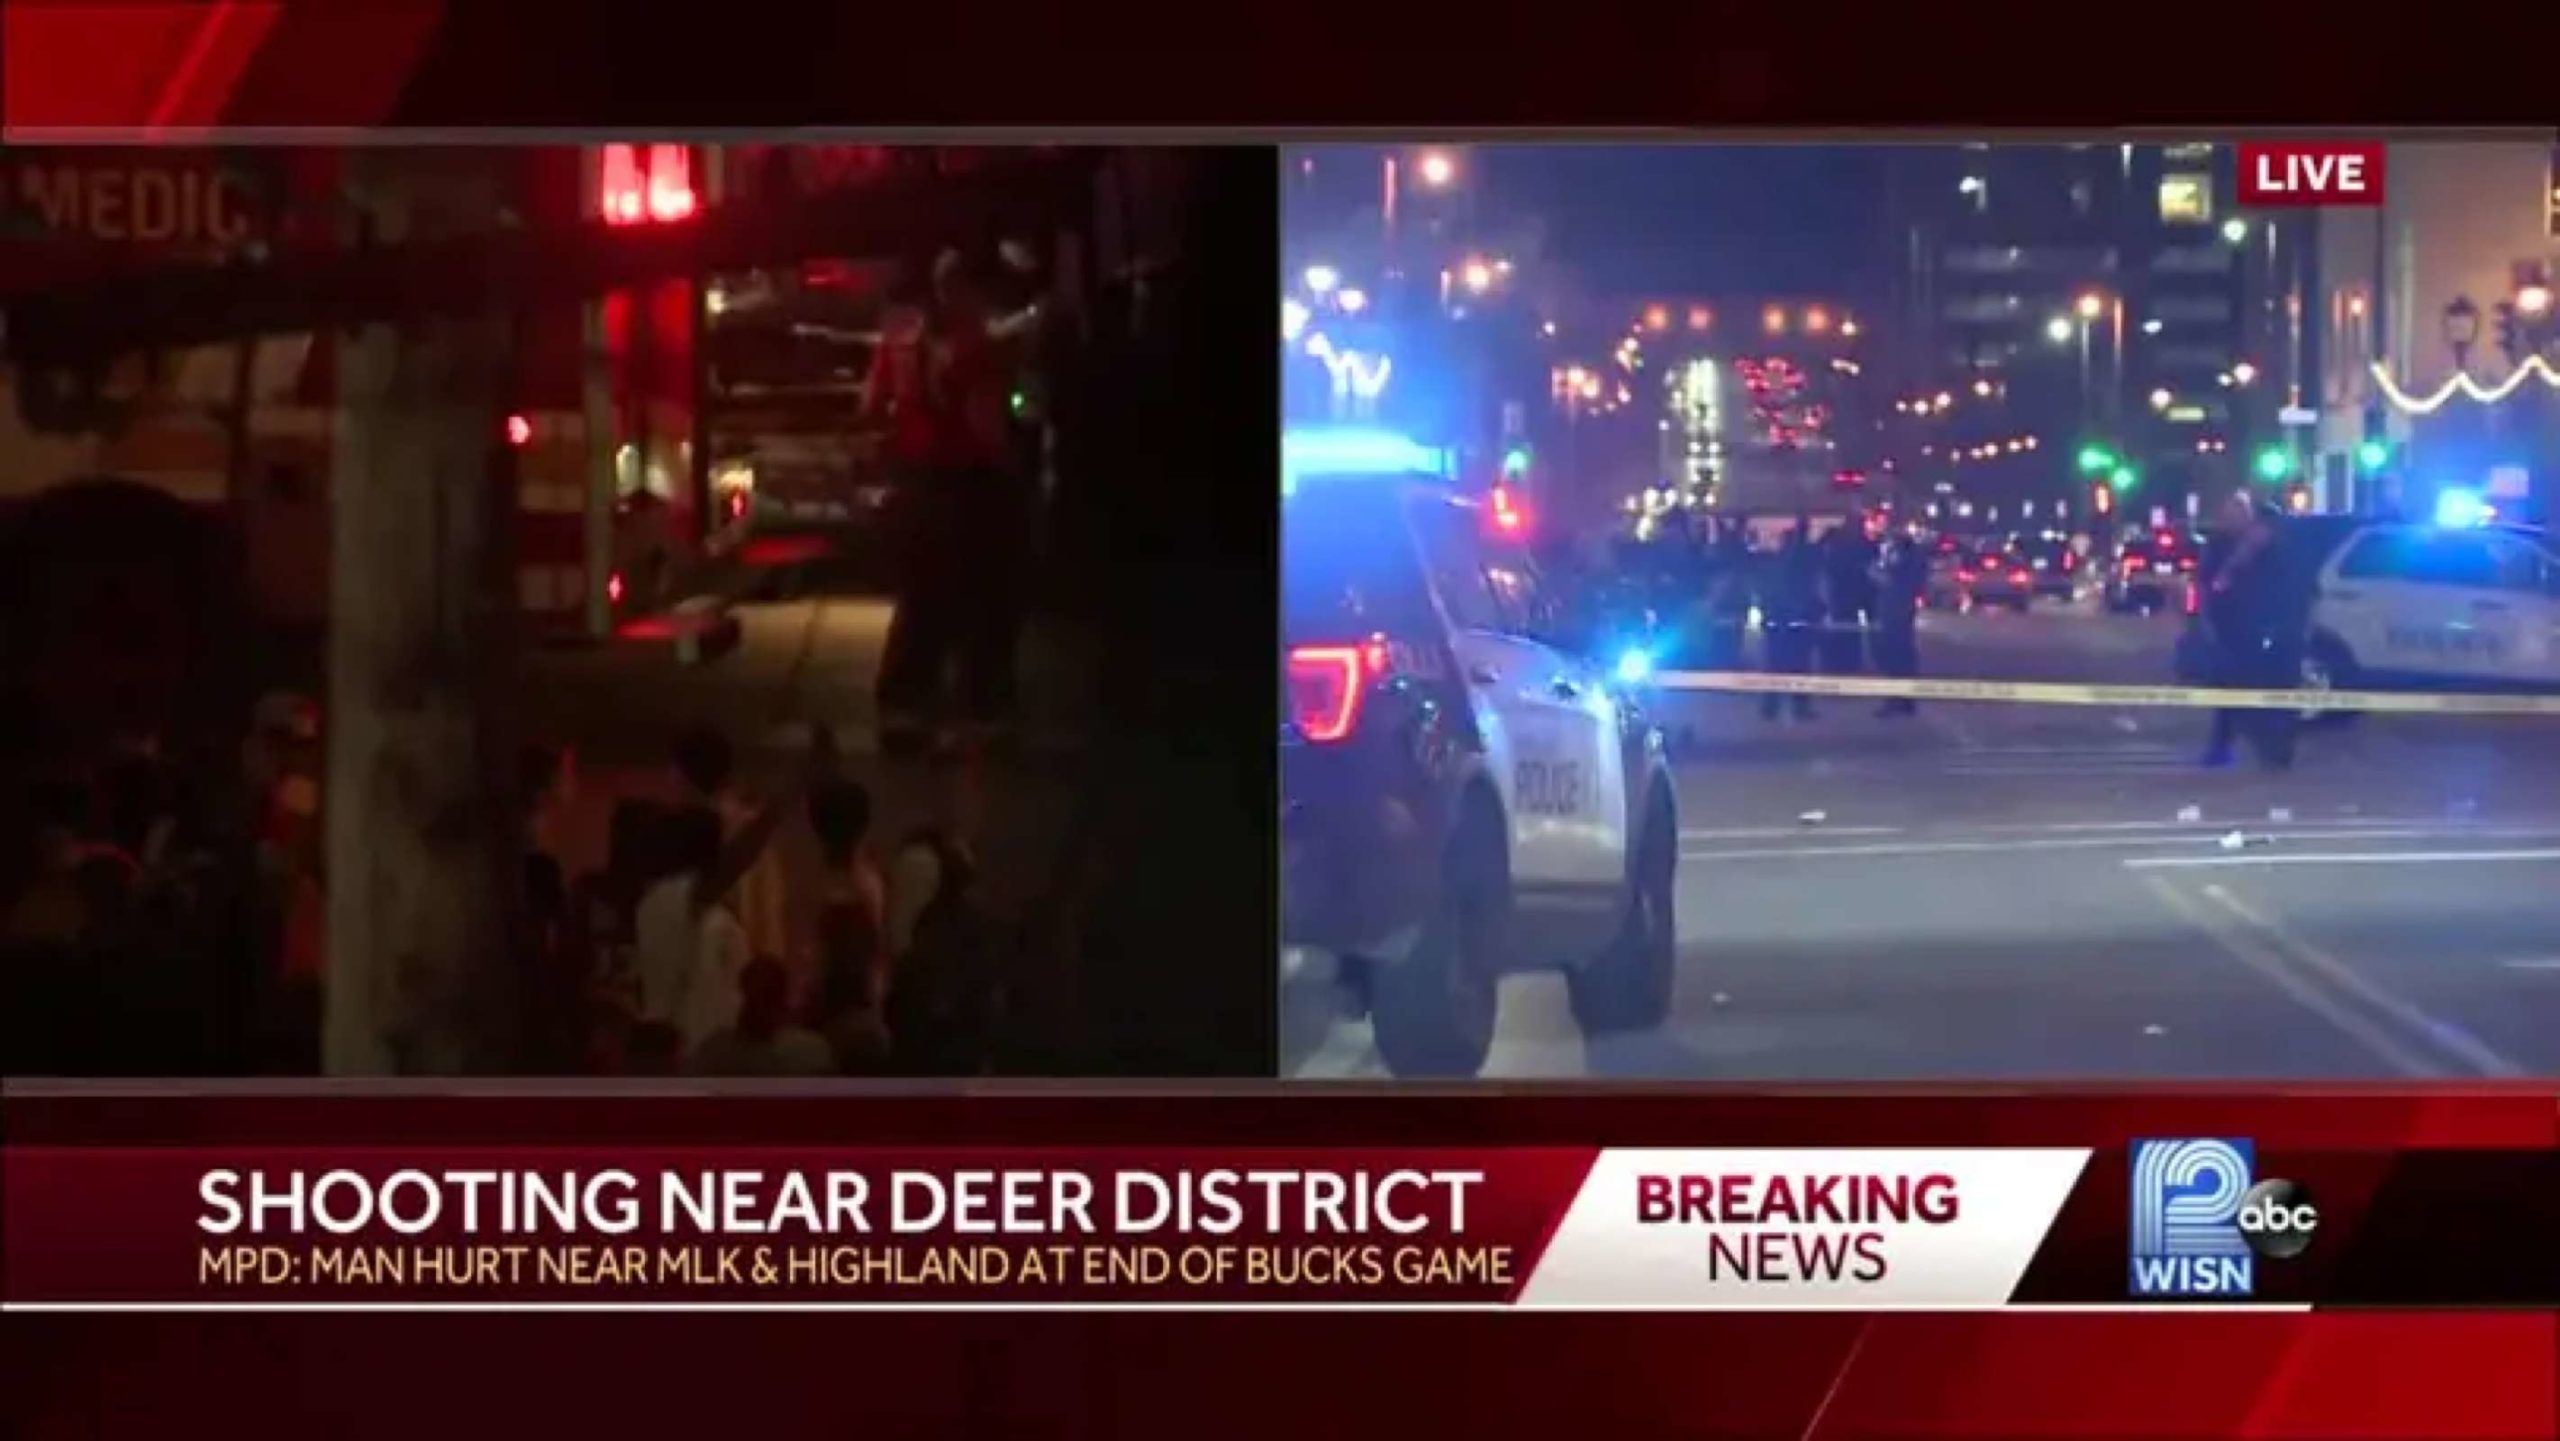 Deer District Becomes the Fear District